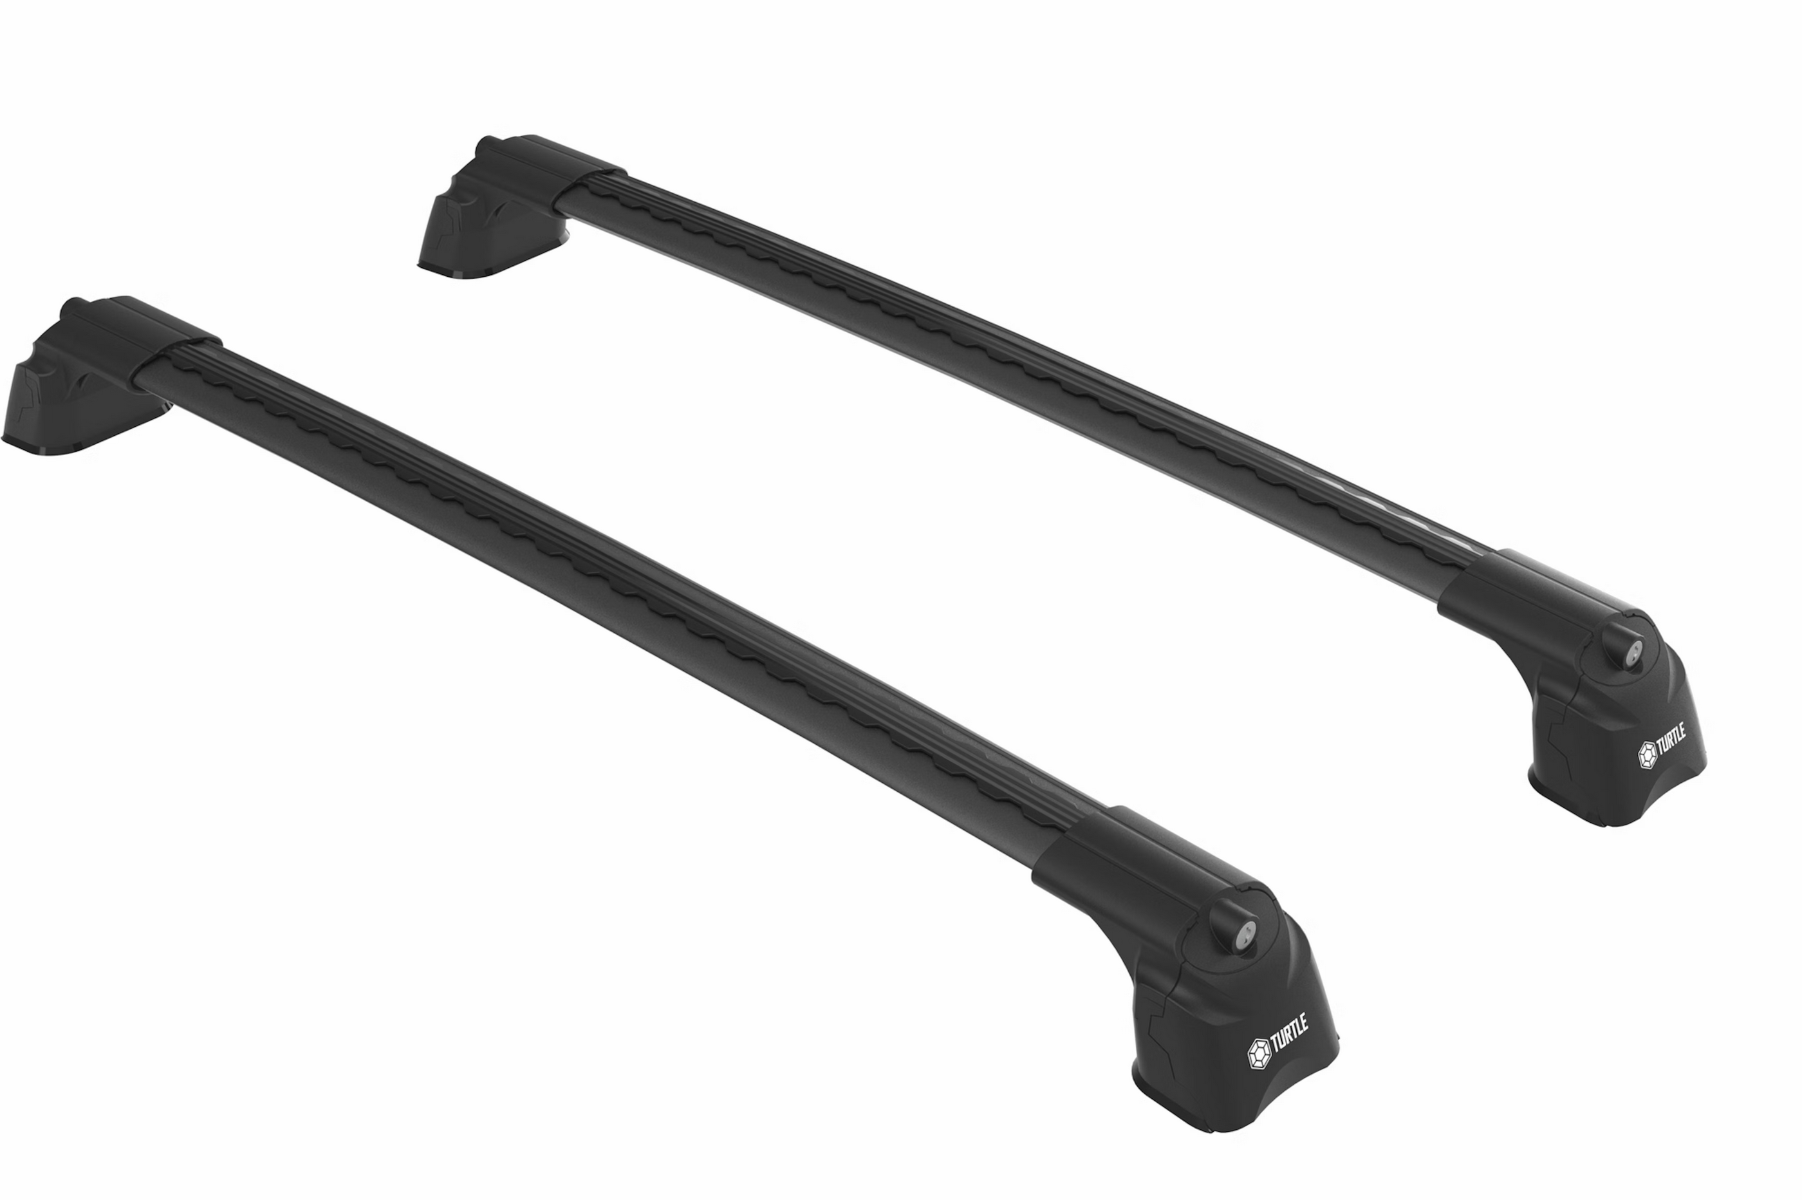 Turtle AIR3 Black 2 Bar for Mazda CX-9 TB 5dr SUV with Bare Roof (2012 to 2016)